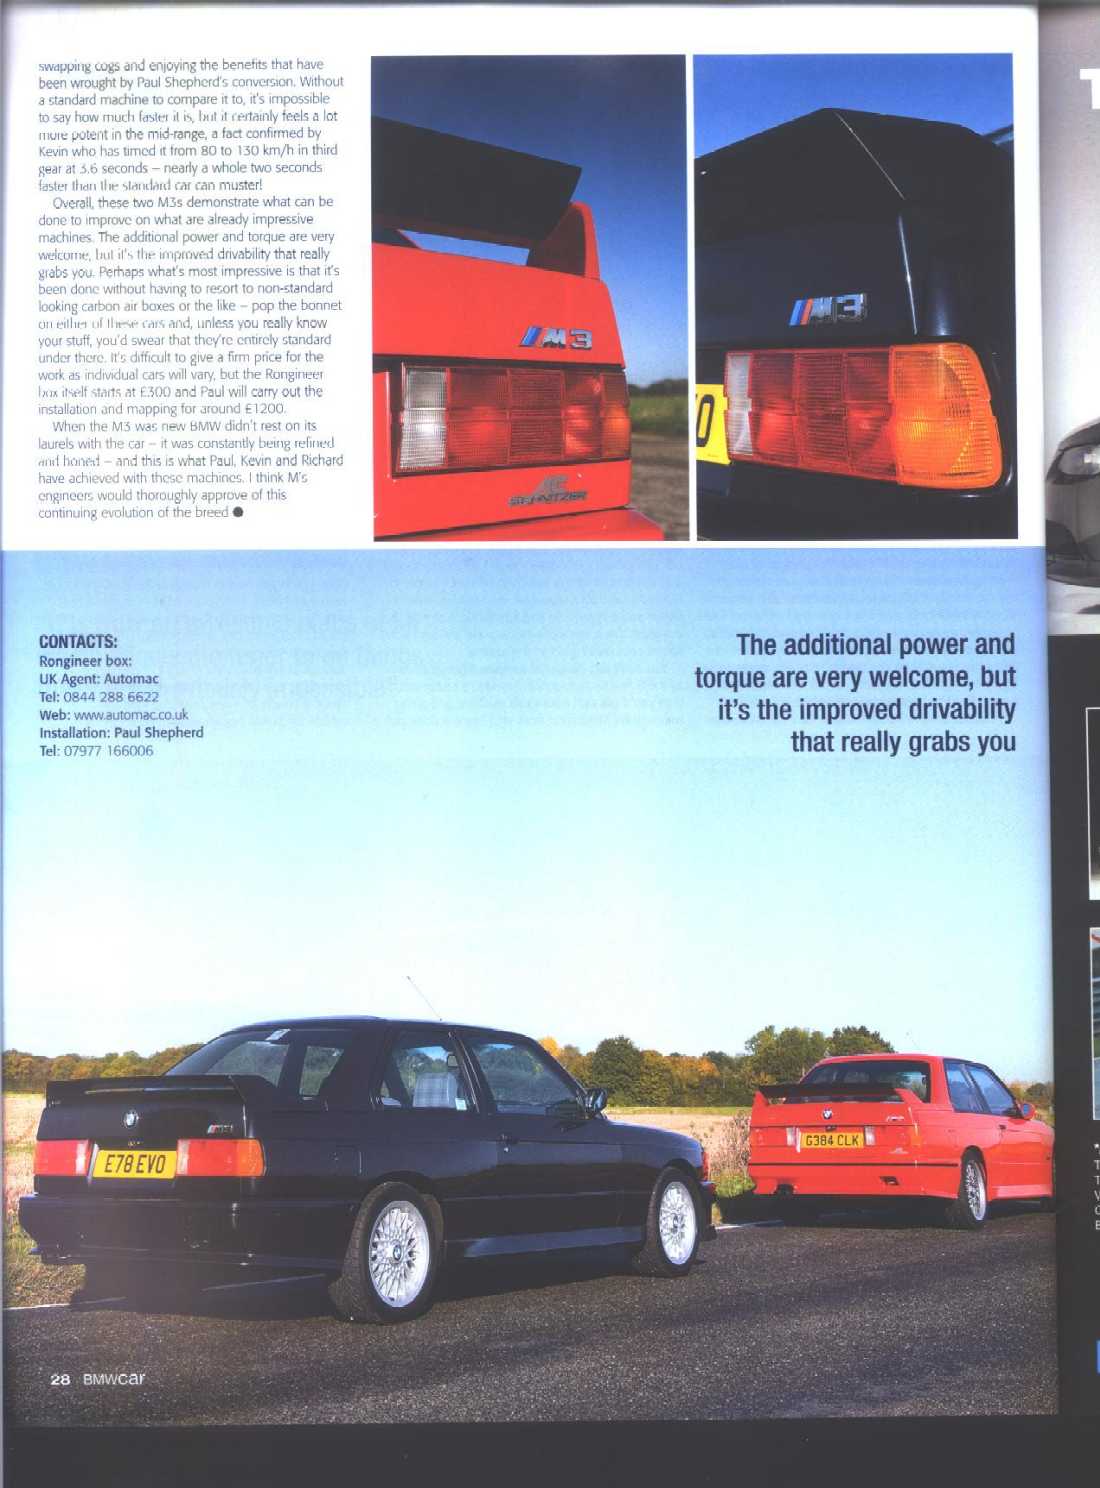 Page 7 of BMWCar magazine article featuring the Rongineer M3 Airbox Kit